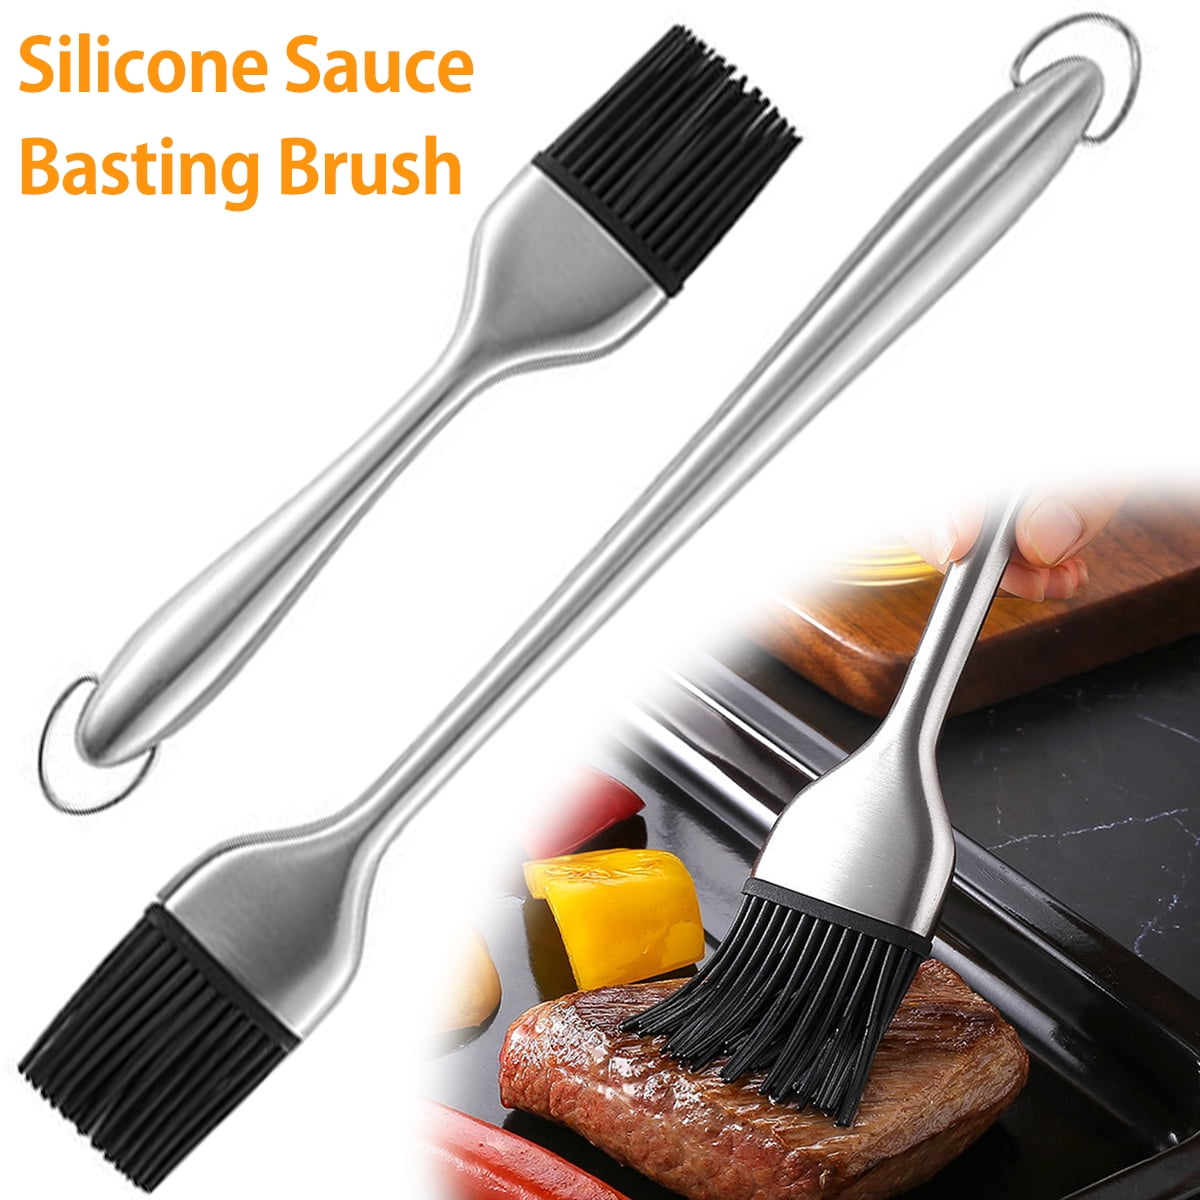 Silicone Butter To Brush BBQ Oil Cook Pastry Grill Food Bread Basting To  Brush Bakeware Kitchen Dining Tool Free Shiping From Airmen, $0.34